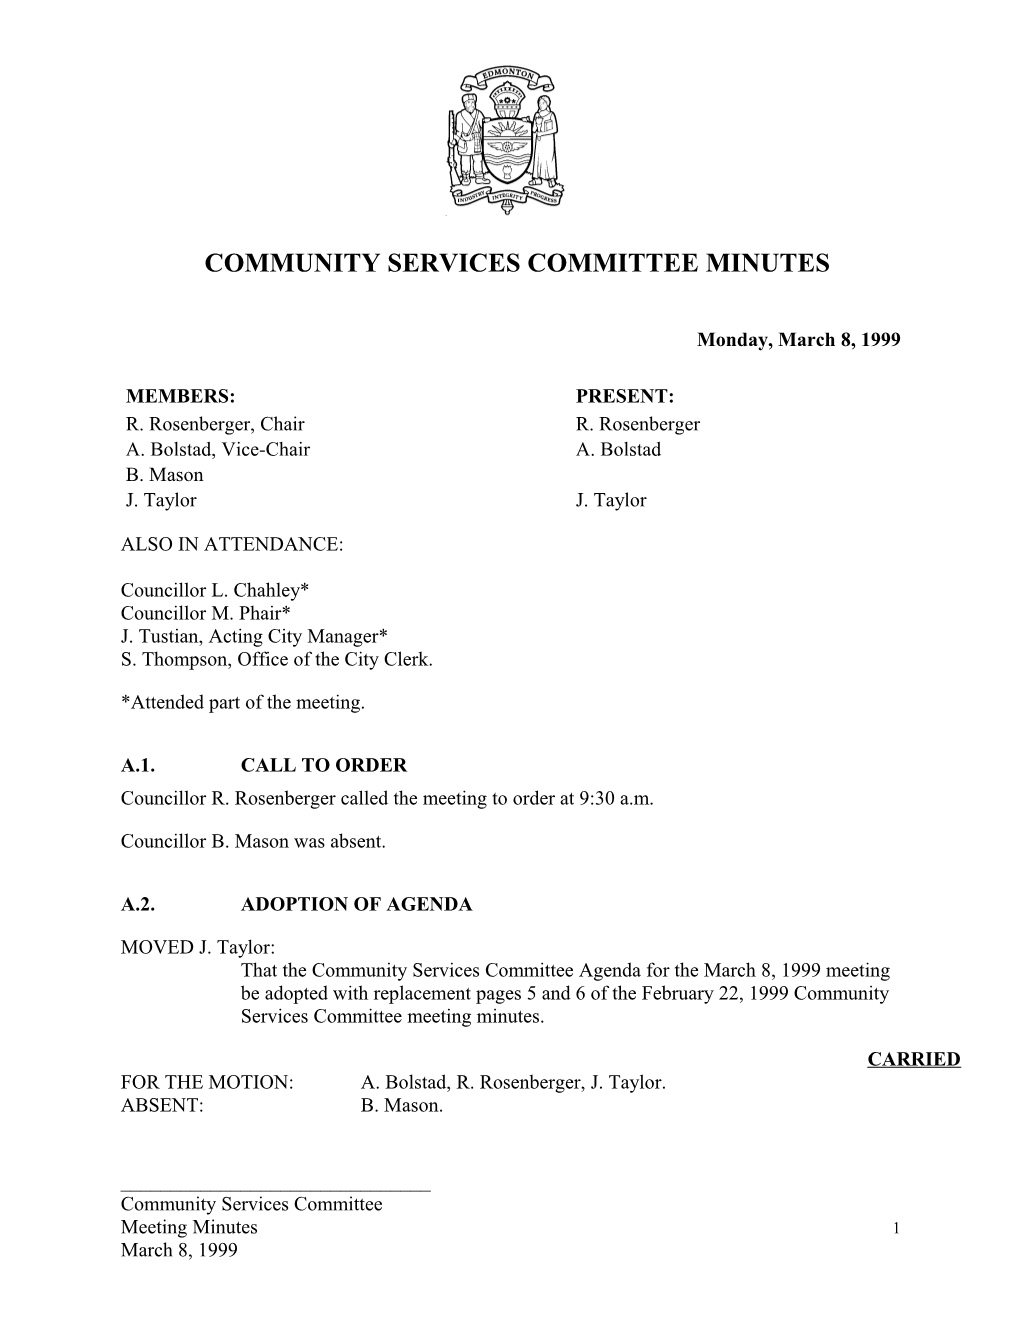 Minutes for Community Services Committee March 8, 1999 Meeting